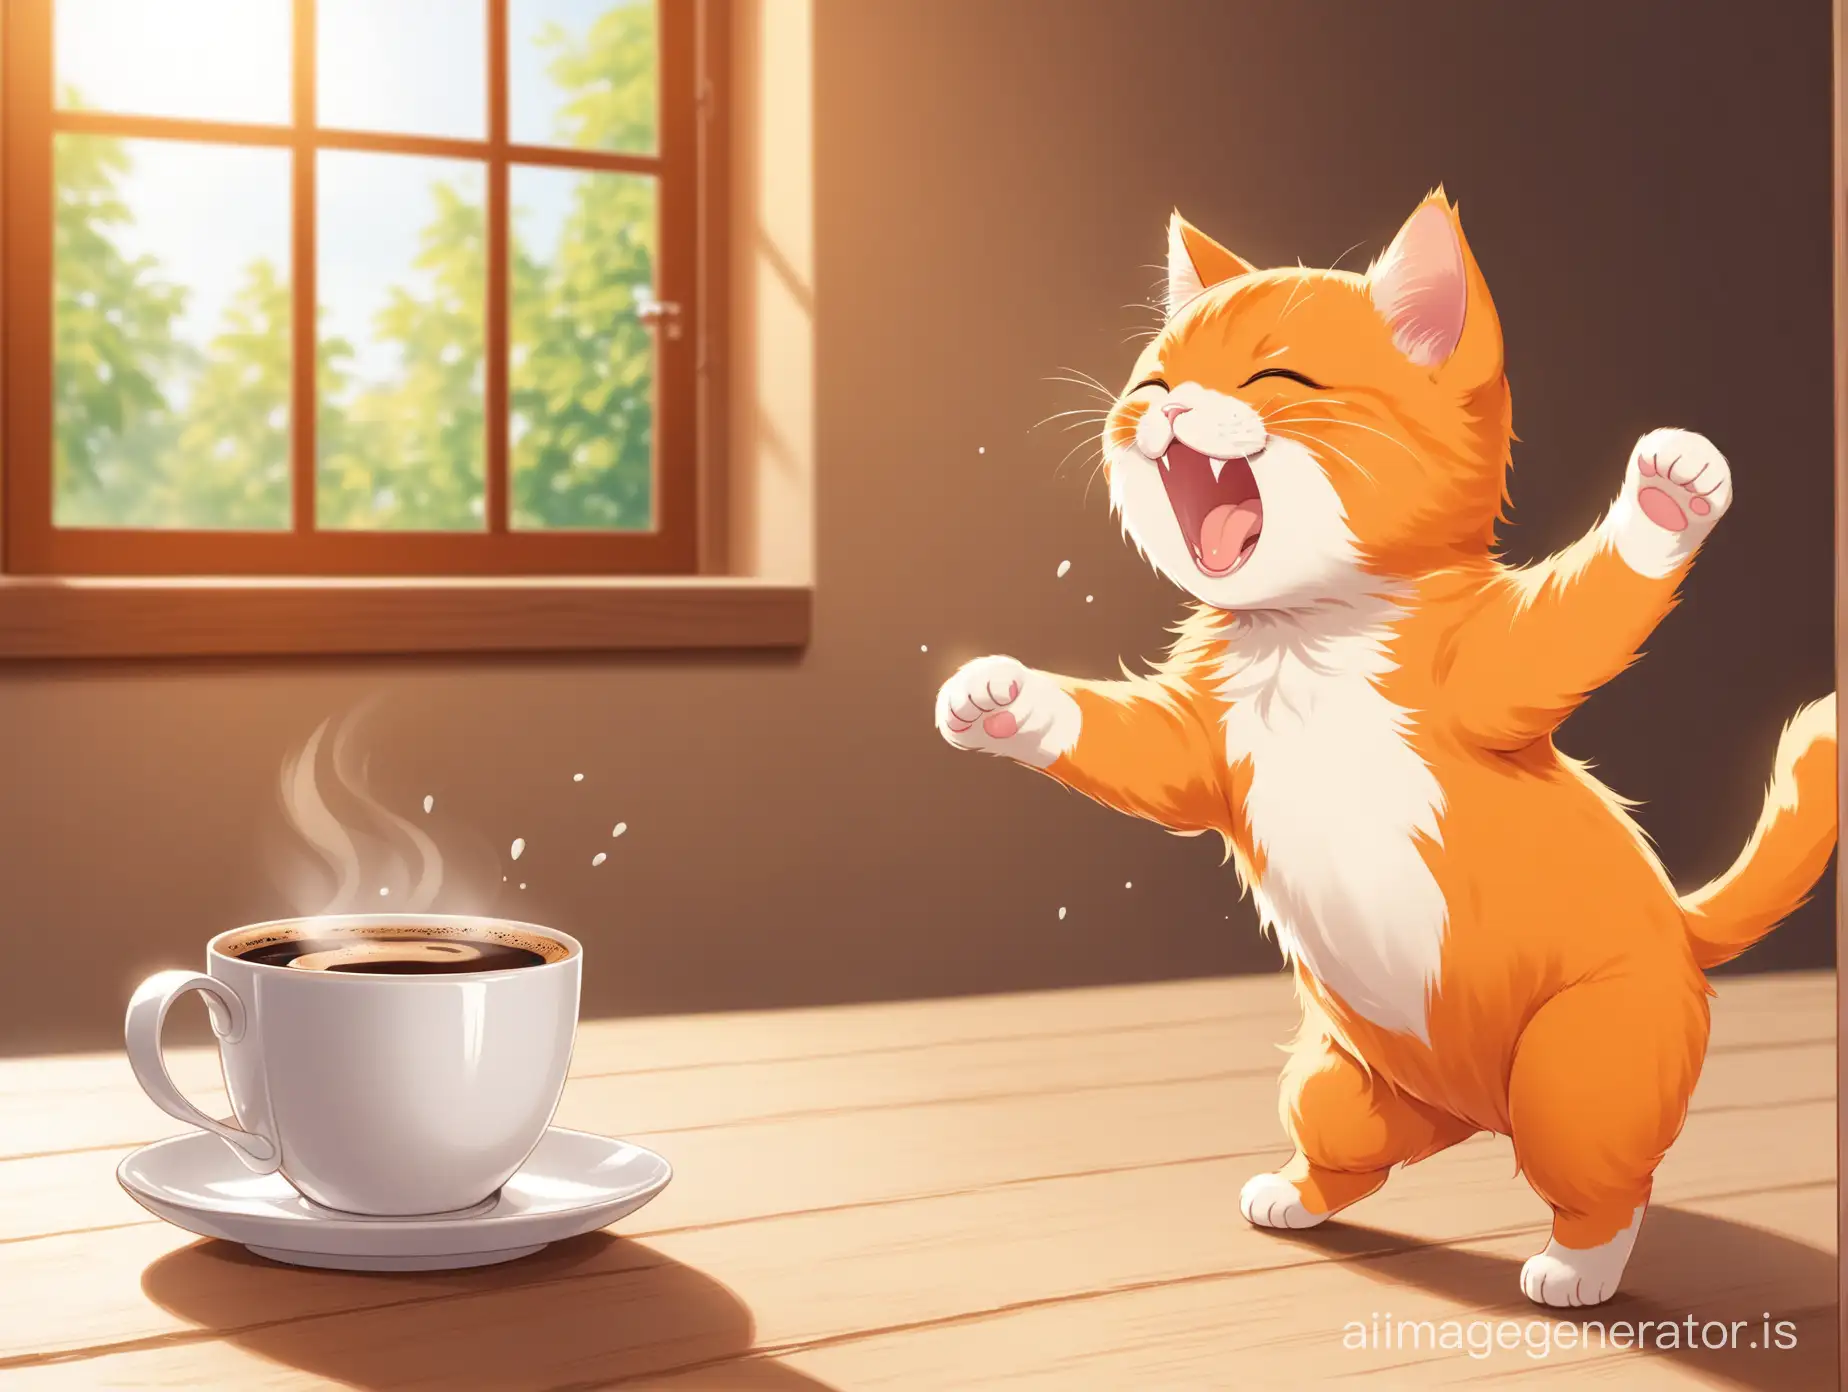 Adorable-Kitten-Yawning-Next-to-Coffee-Cup-Shutterstock-Contest-Winner